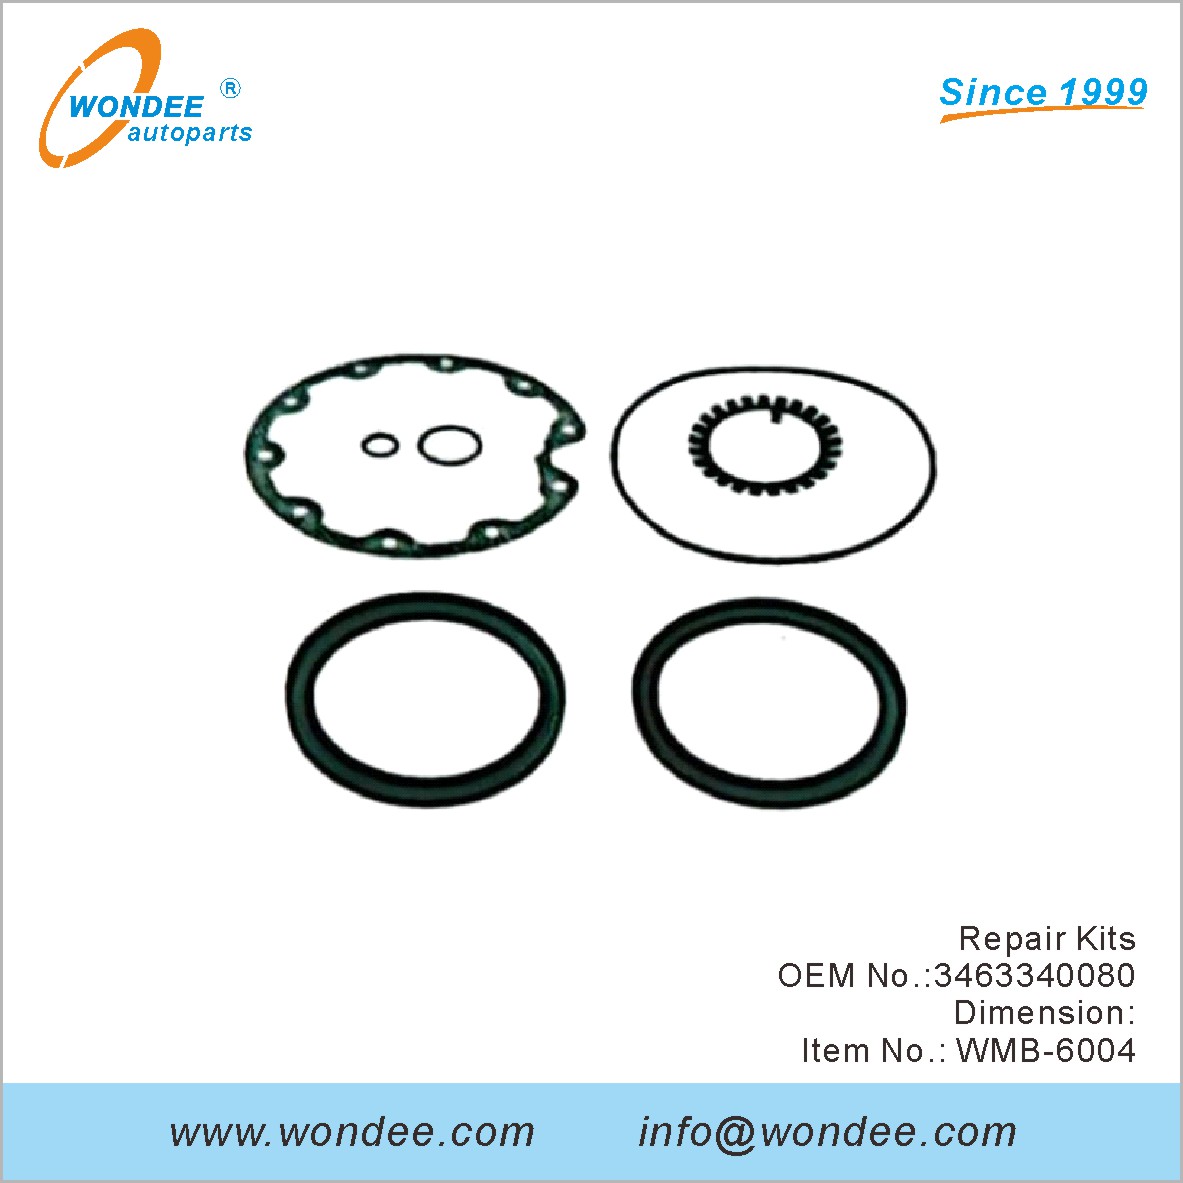 Repair Kits OEM 3463340080 for Benz from WONDEE